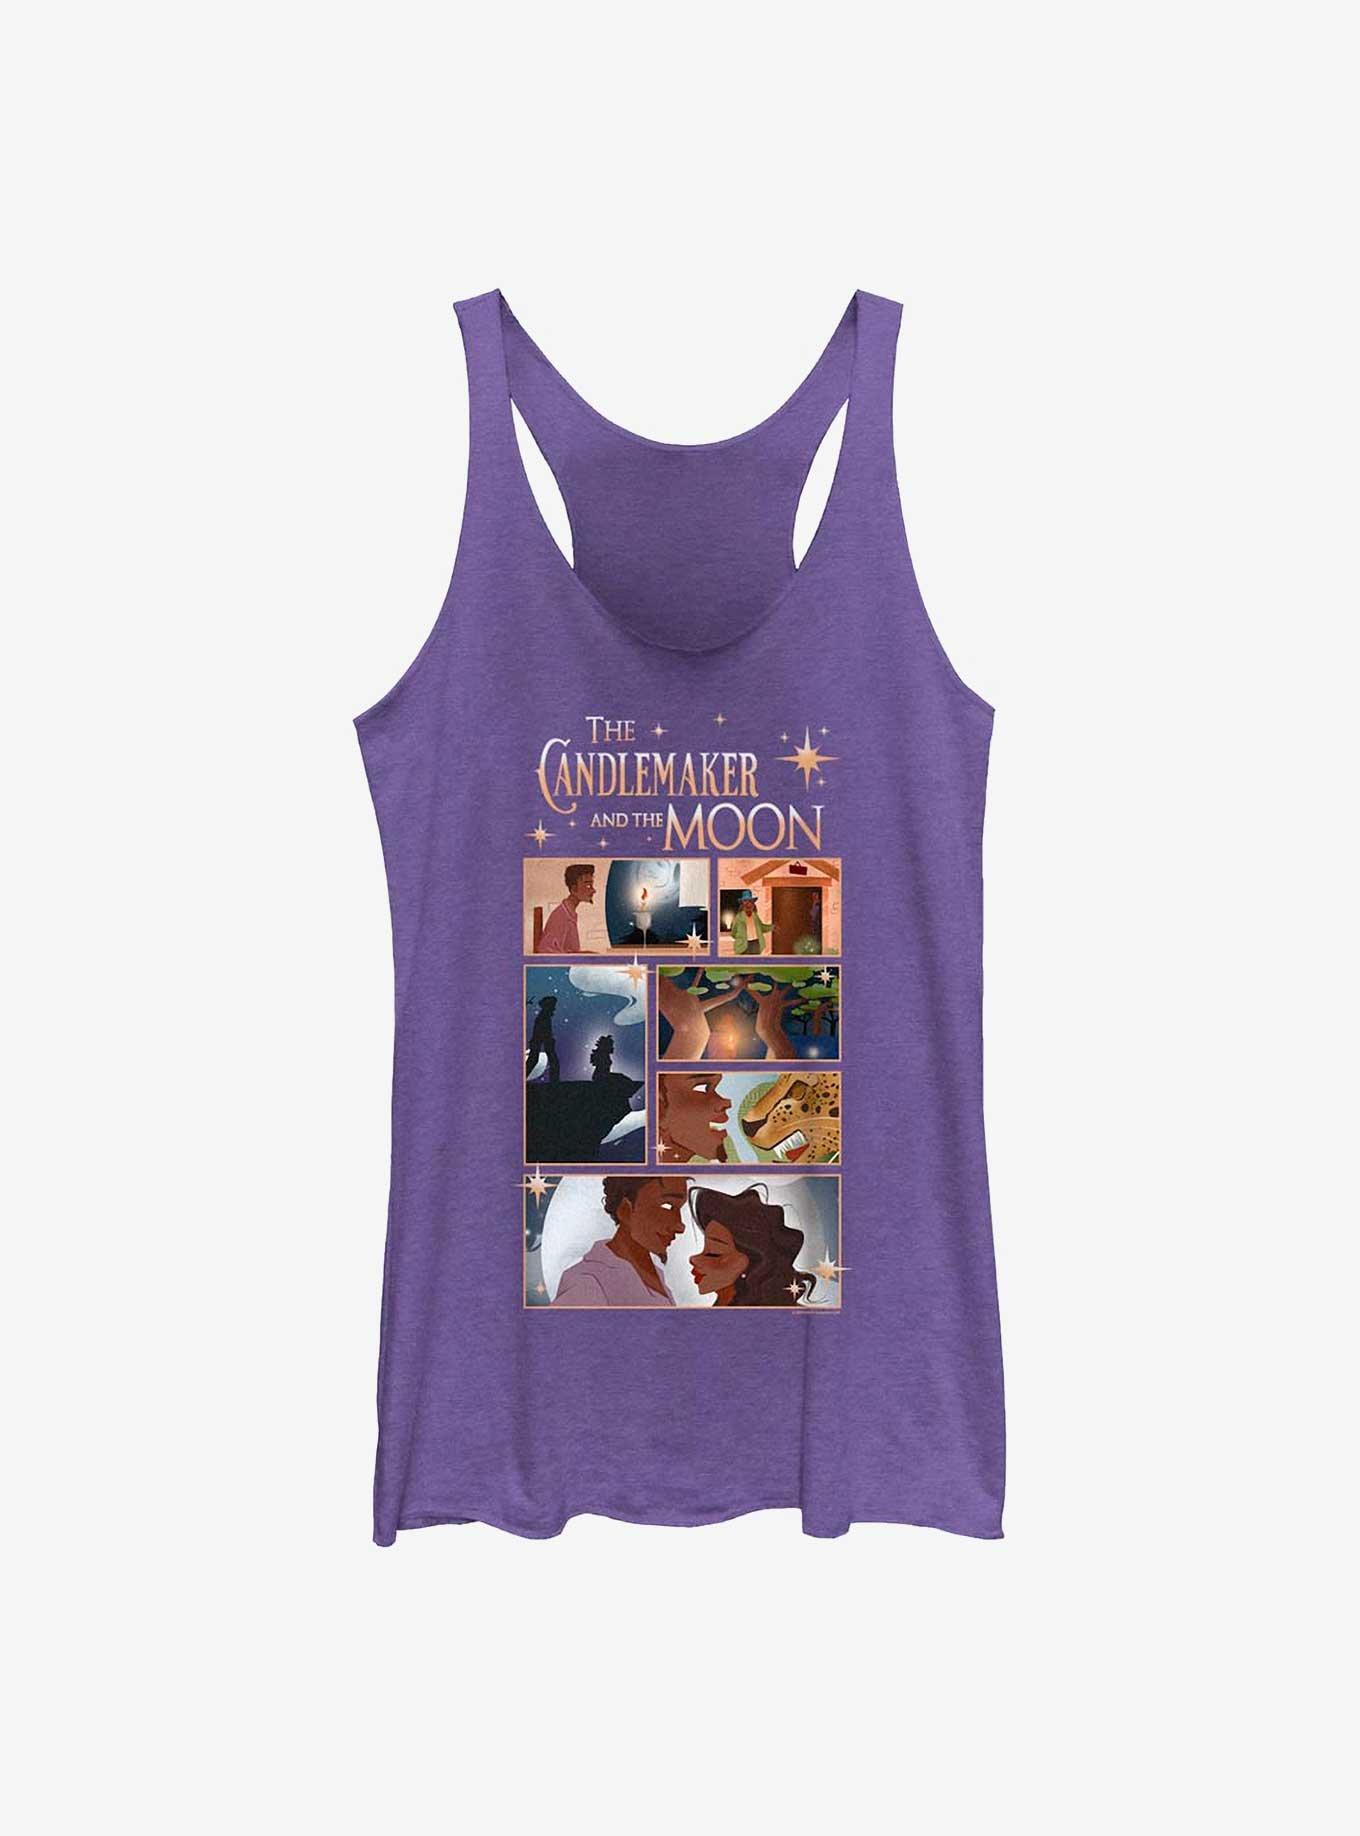 Anboran the Candlemaker and Moon Collage Girls Tank